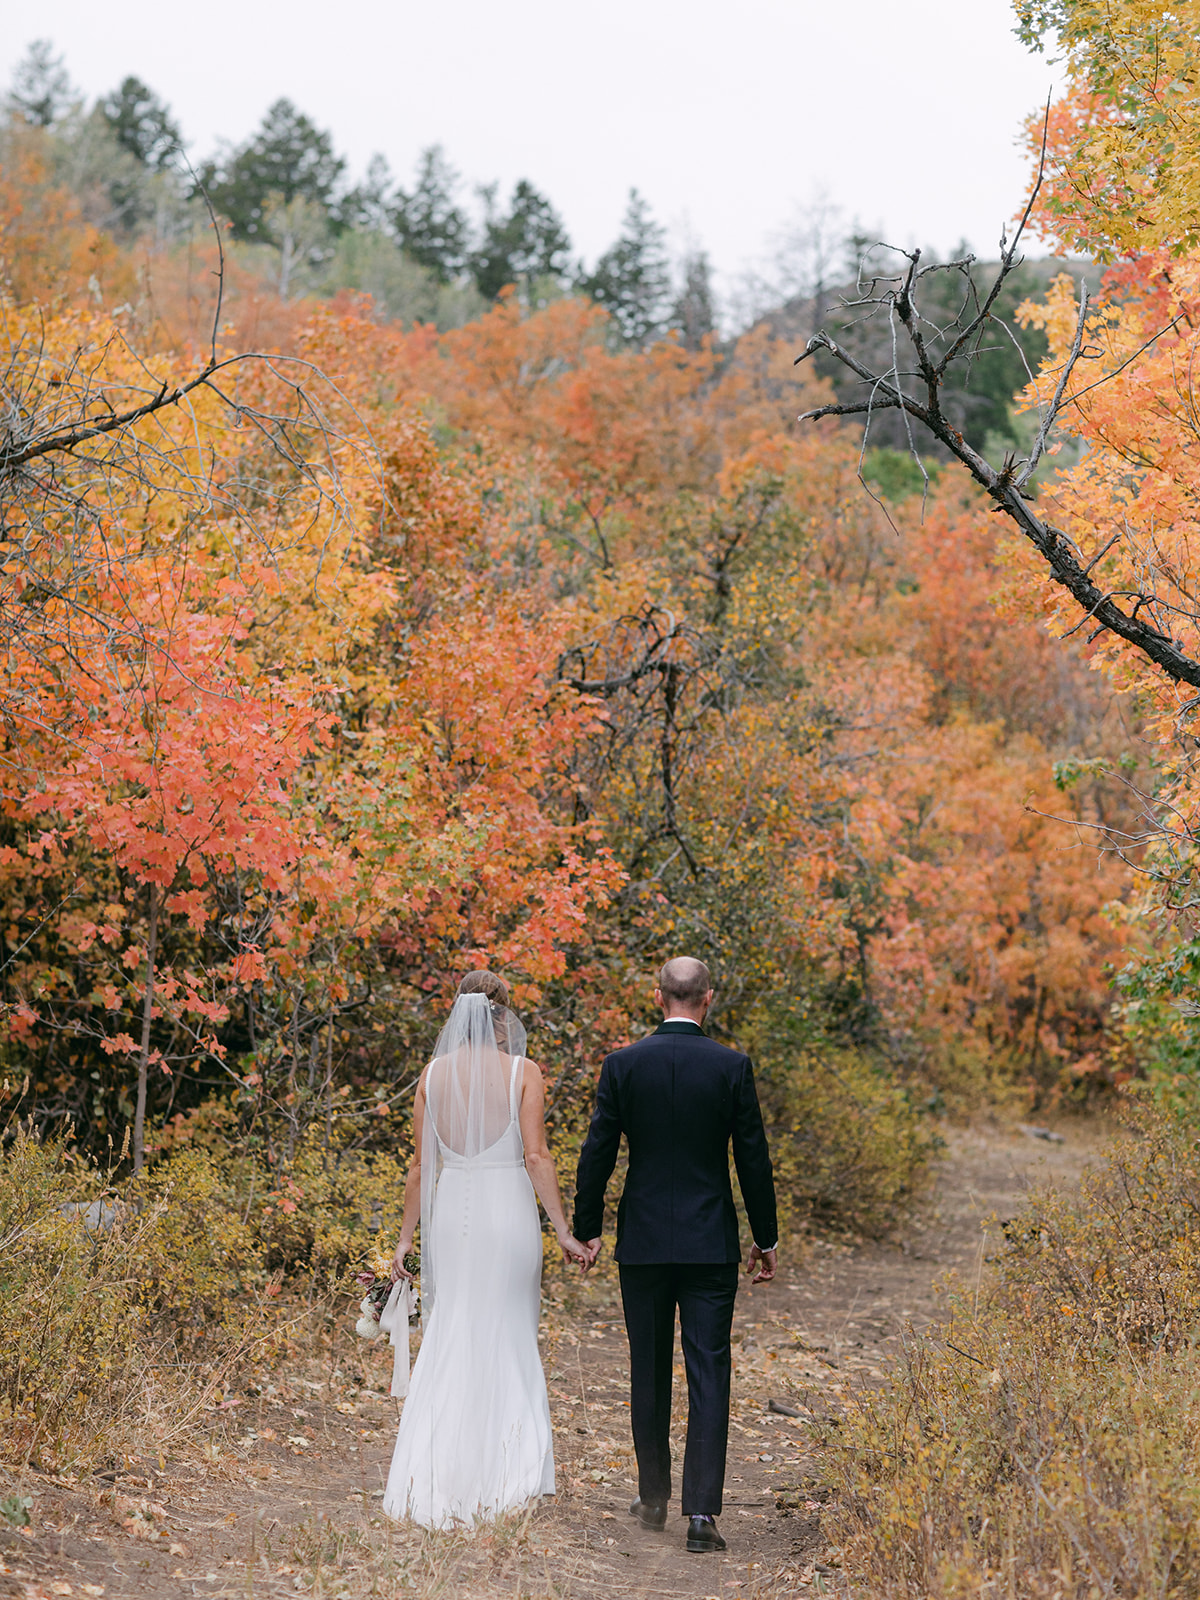 a rustic modern wedding in the high mountains of Utah. The bride is a caucasian female wearing a white crepe fabric wedding dress.
